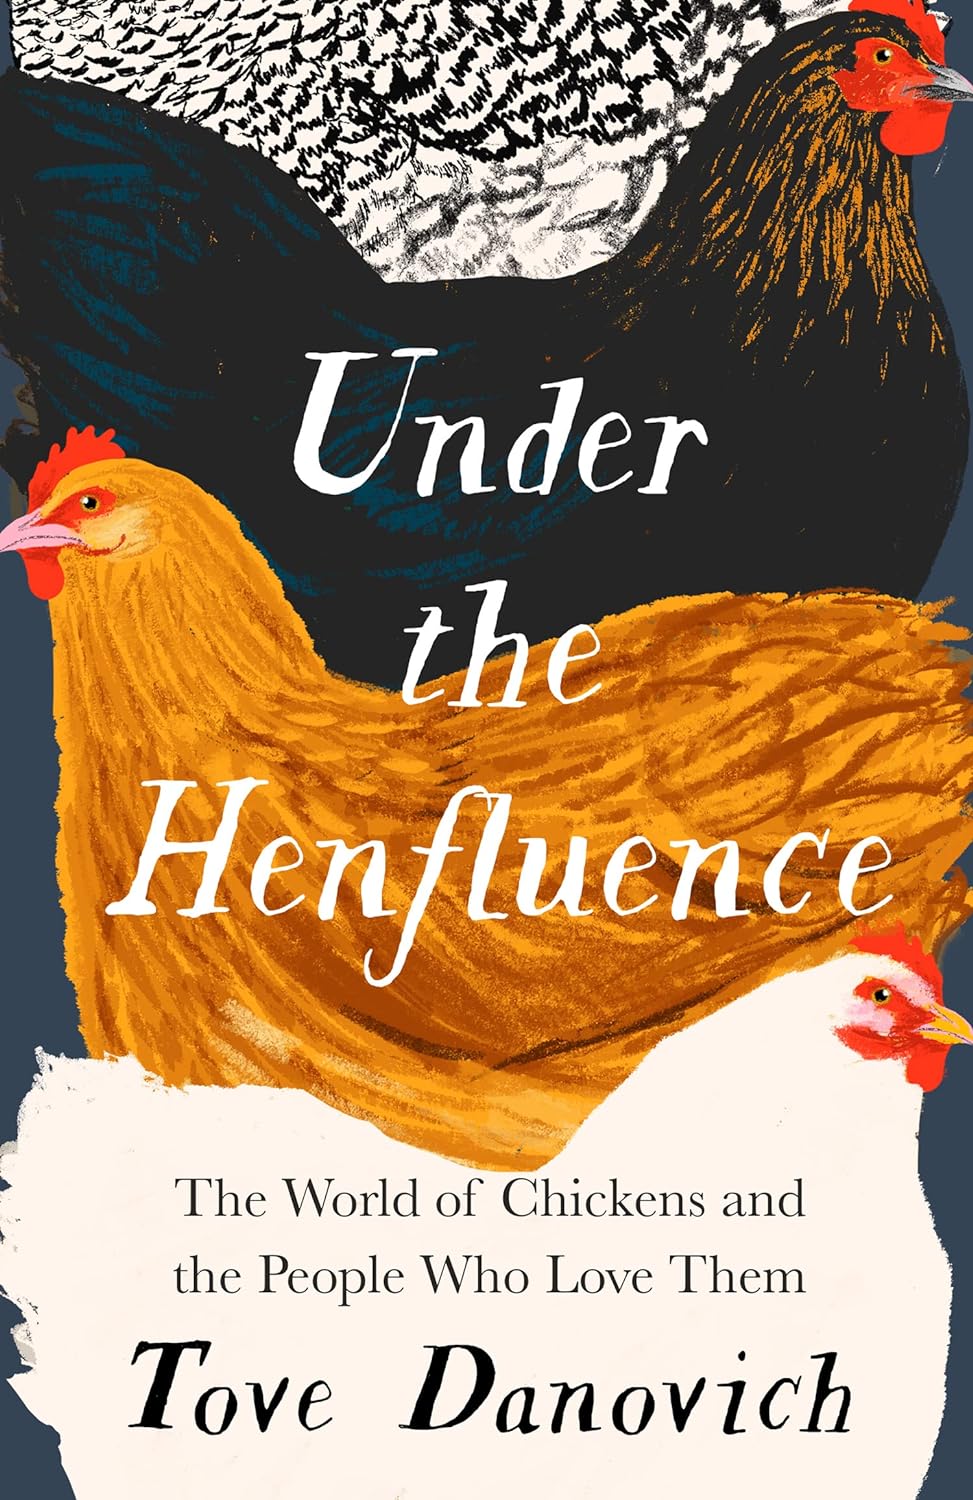 Under The Henfluence: The World of Chickens and the People Who Love Them